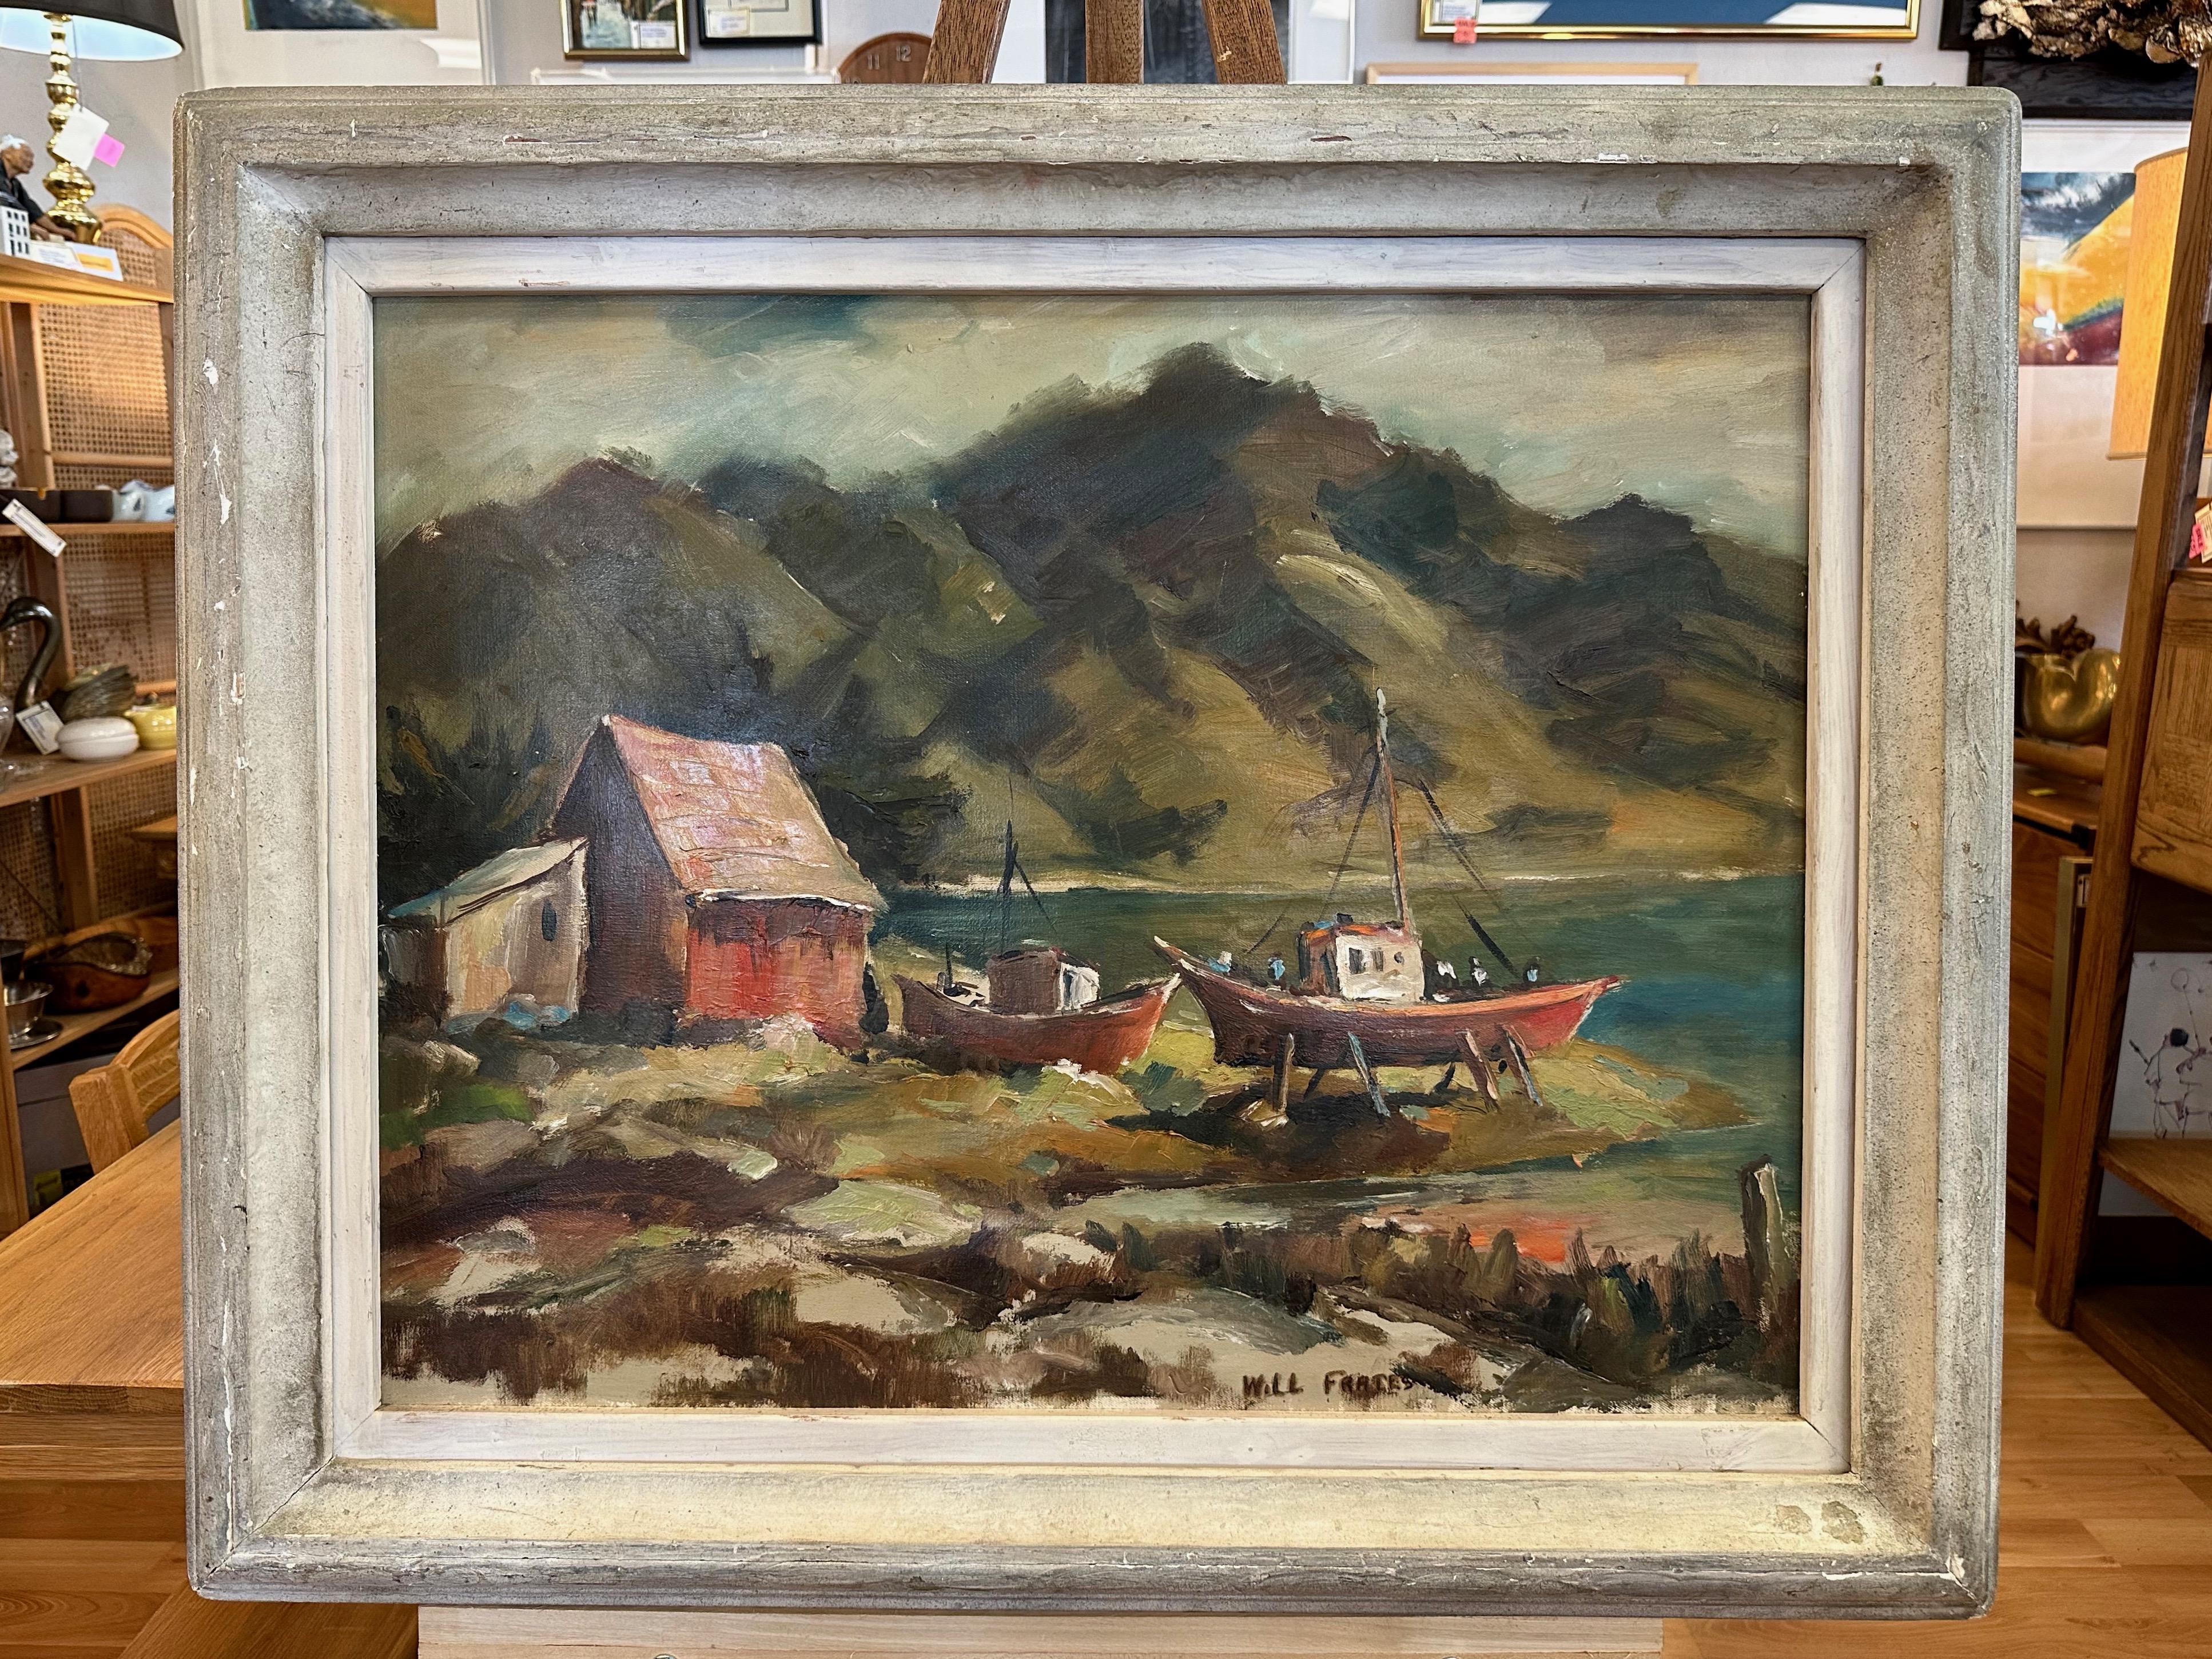 Will Frates, “Princeton Beach”, Impressionist Landscape Oil Painting, c. 1950 For Sale 5